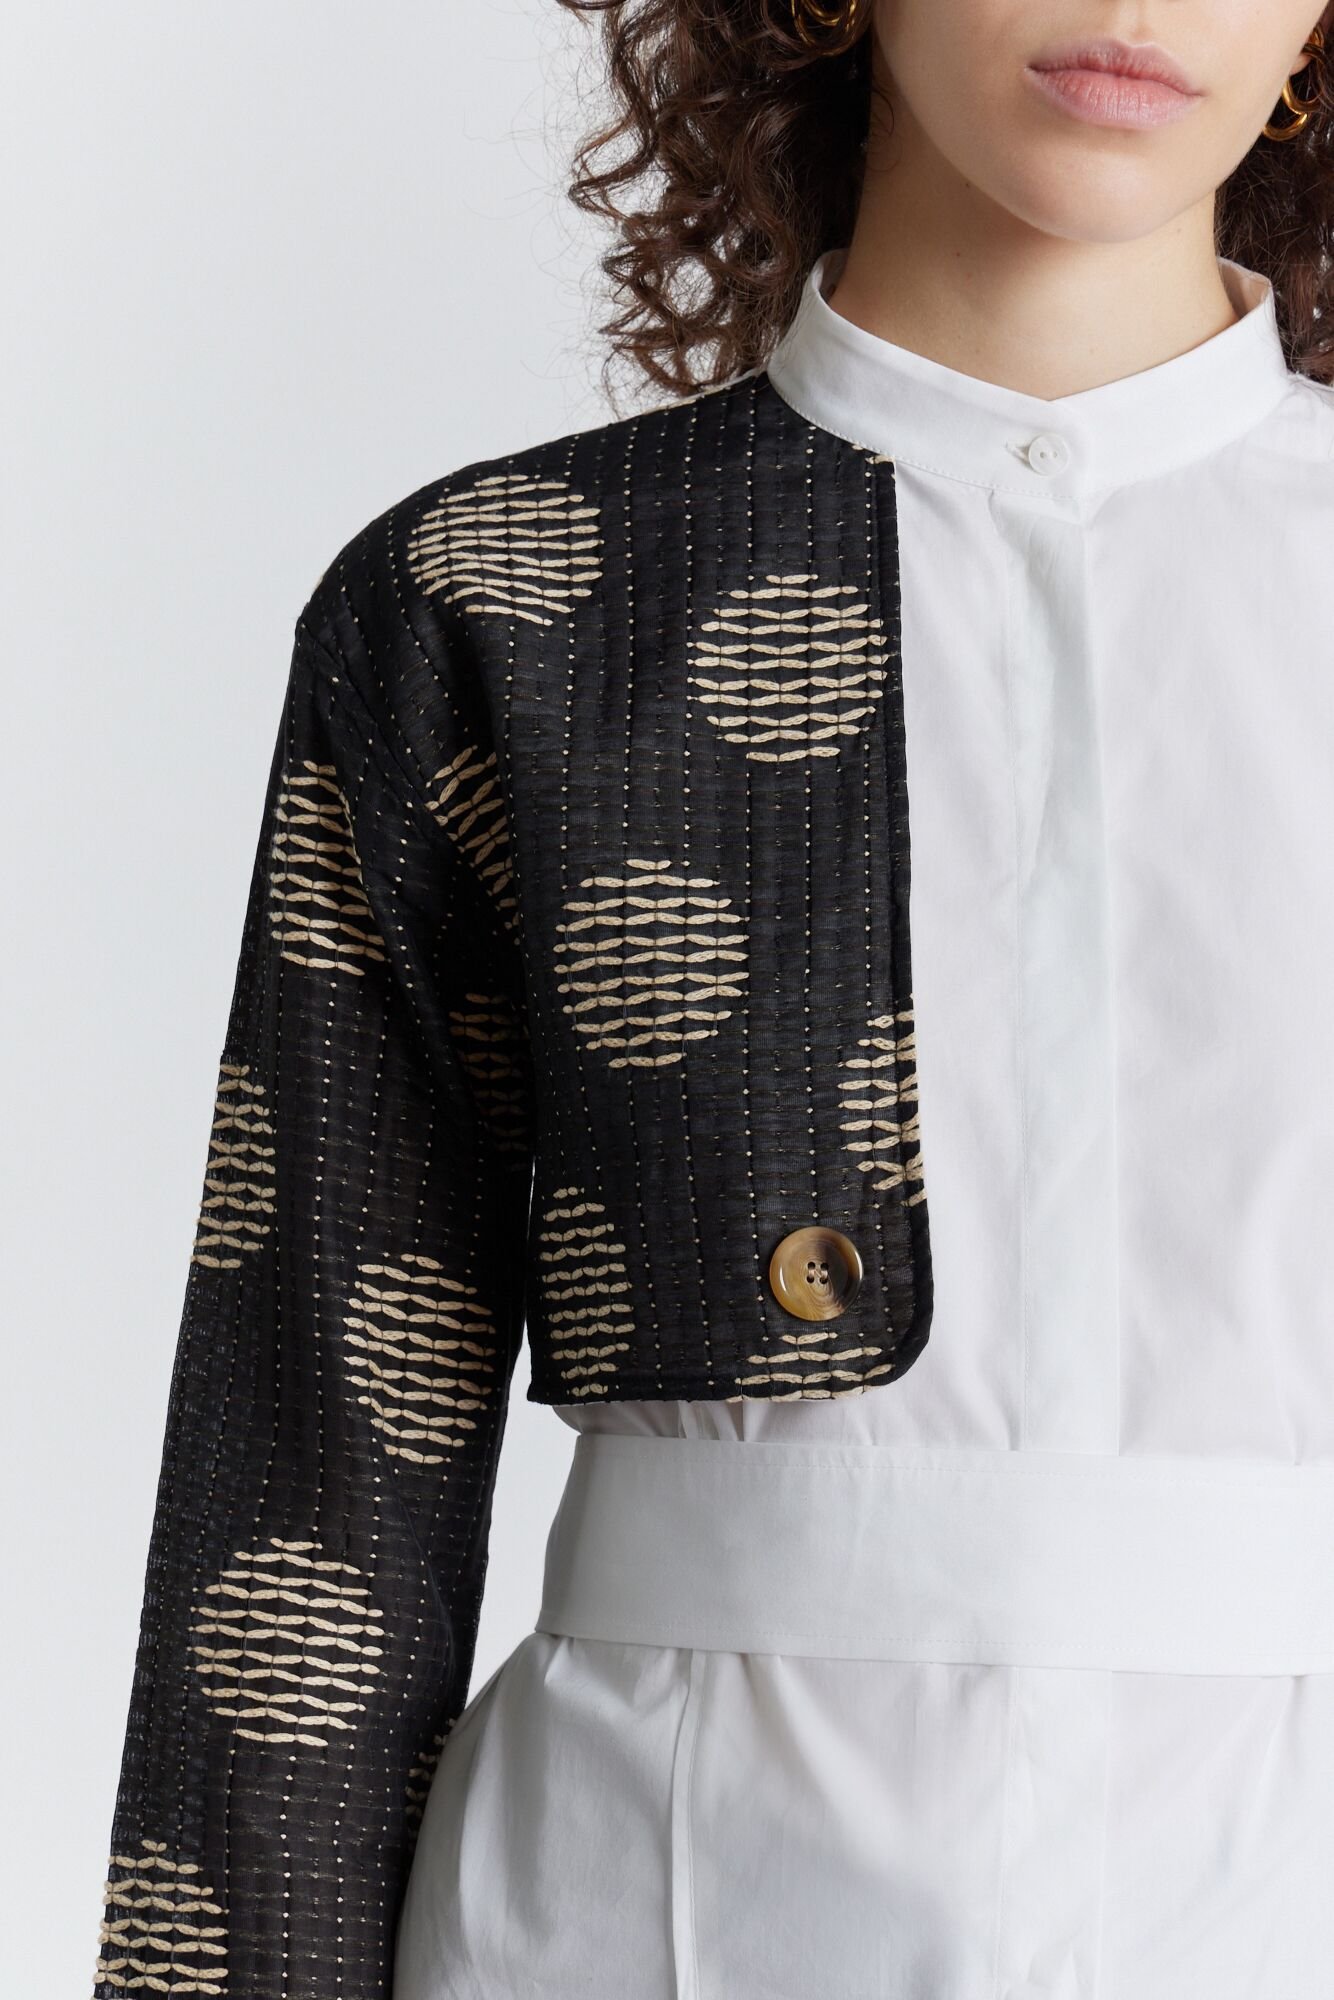 White Shirt with Black Textured Sleeve